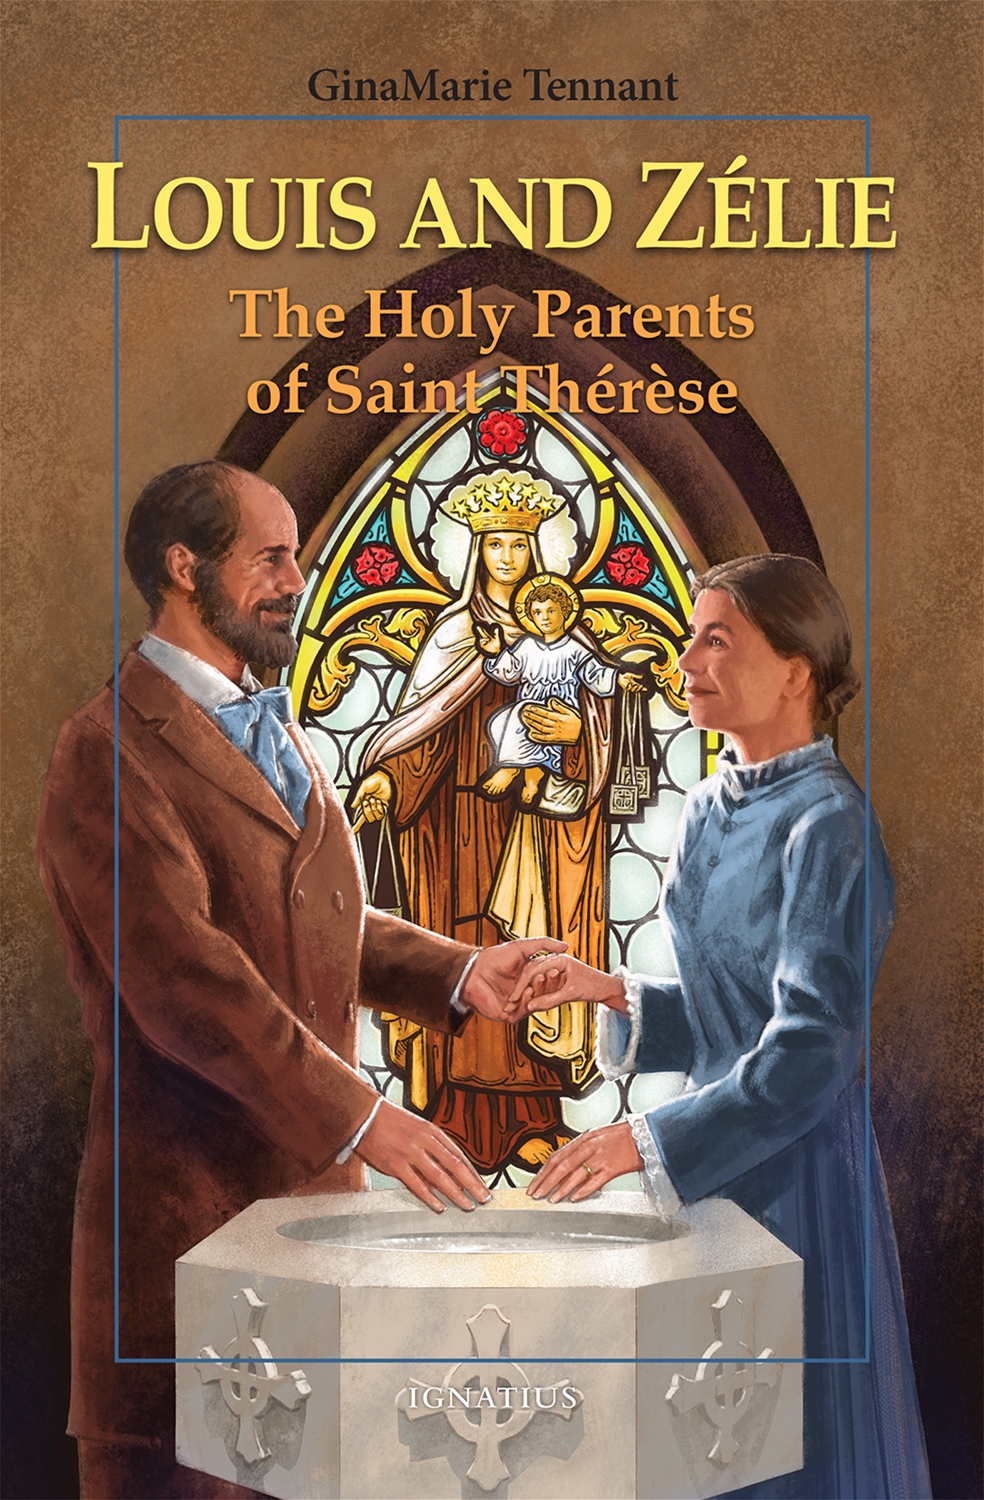 Charm Parents of St. Therese Tiny Saints St Zelie Martin Louis and St